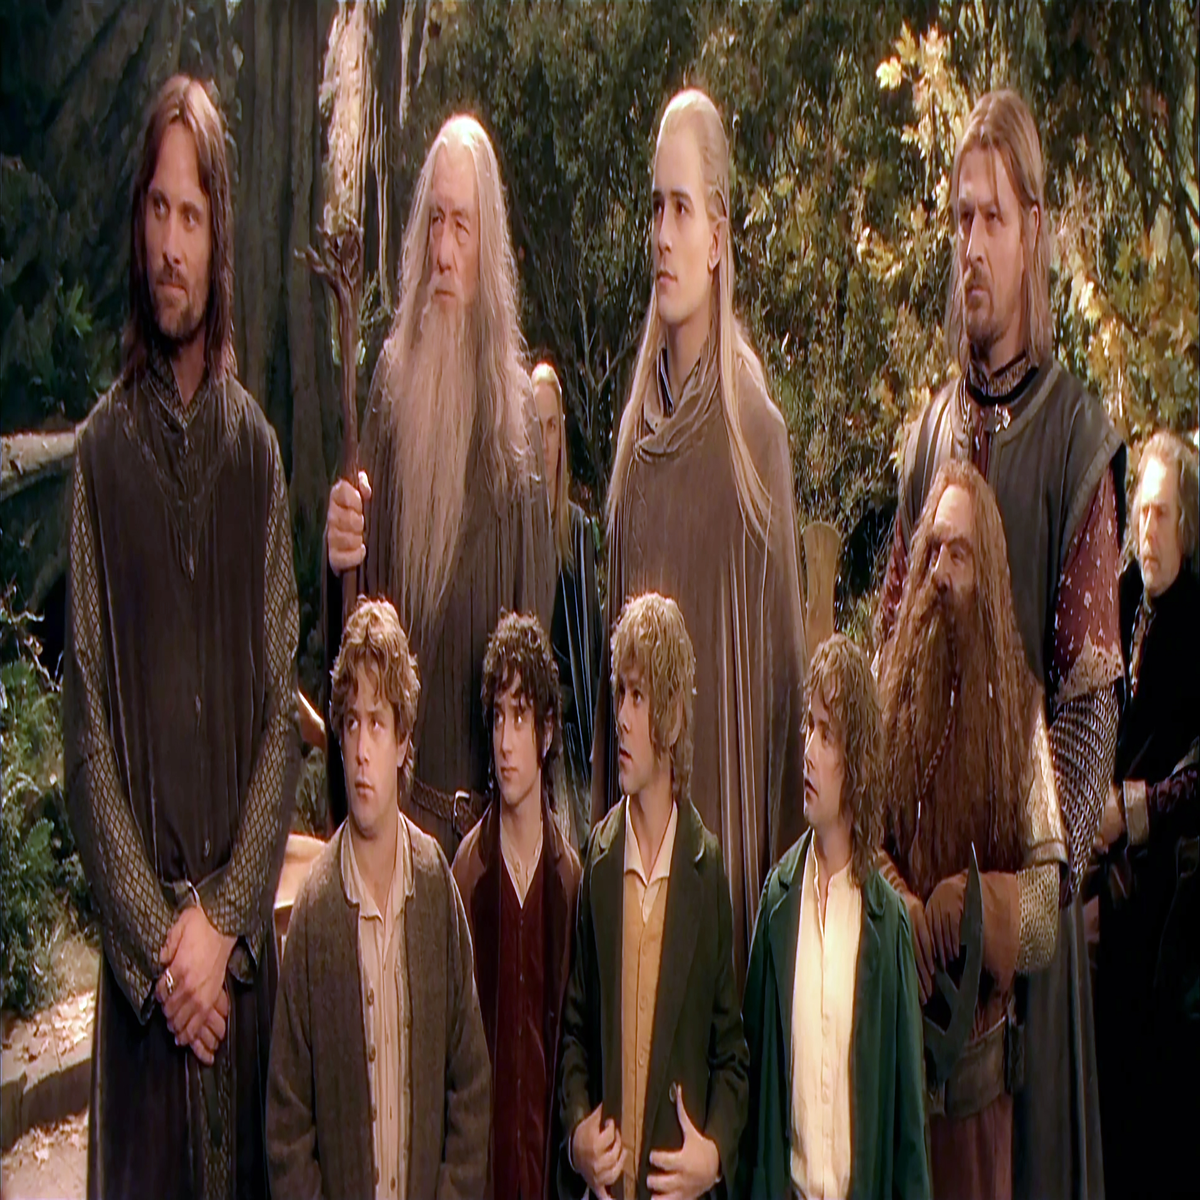 How to Watch The Lord of the Rings in Chronological Order